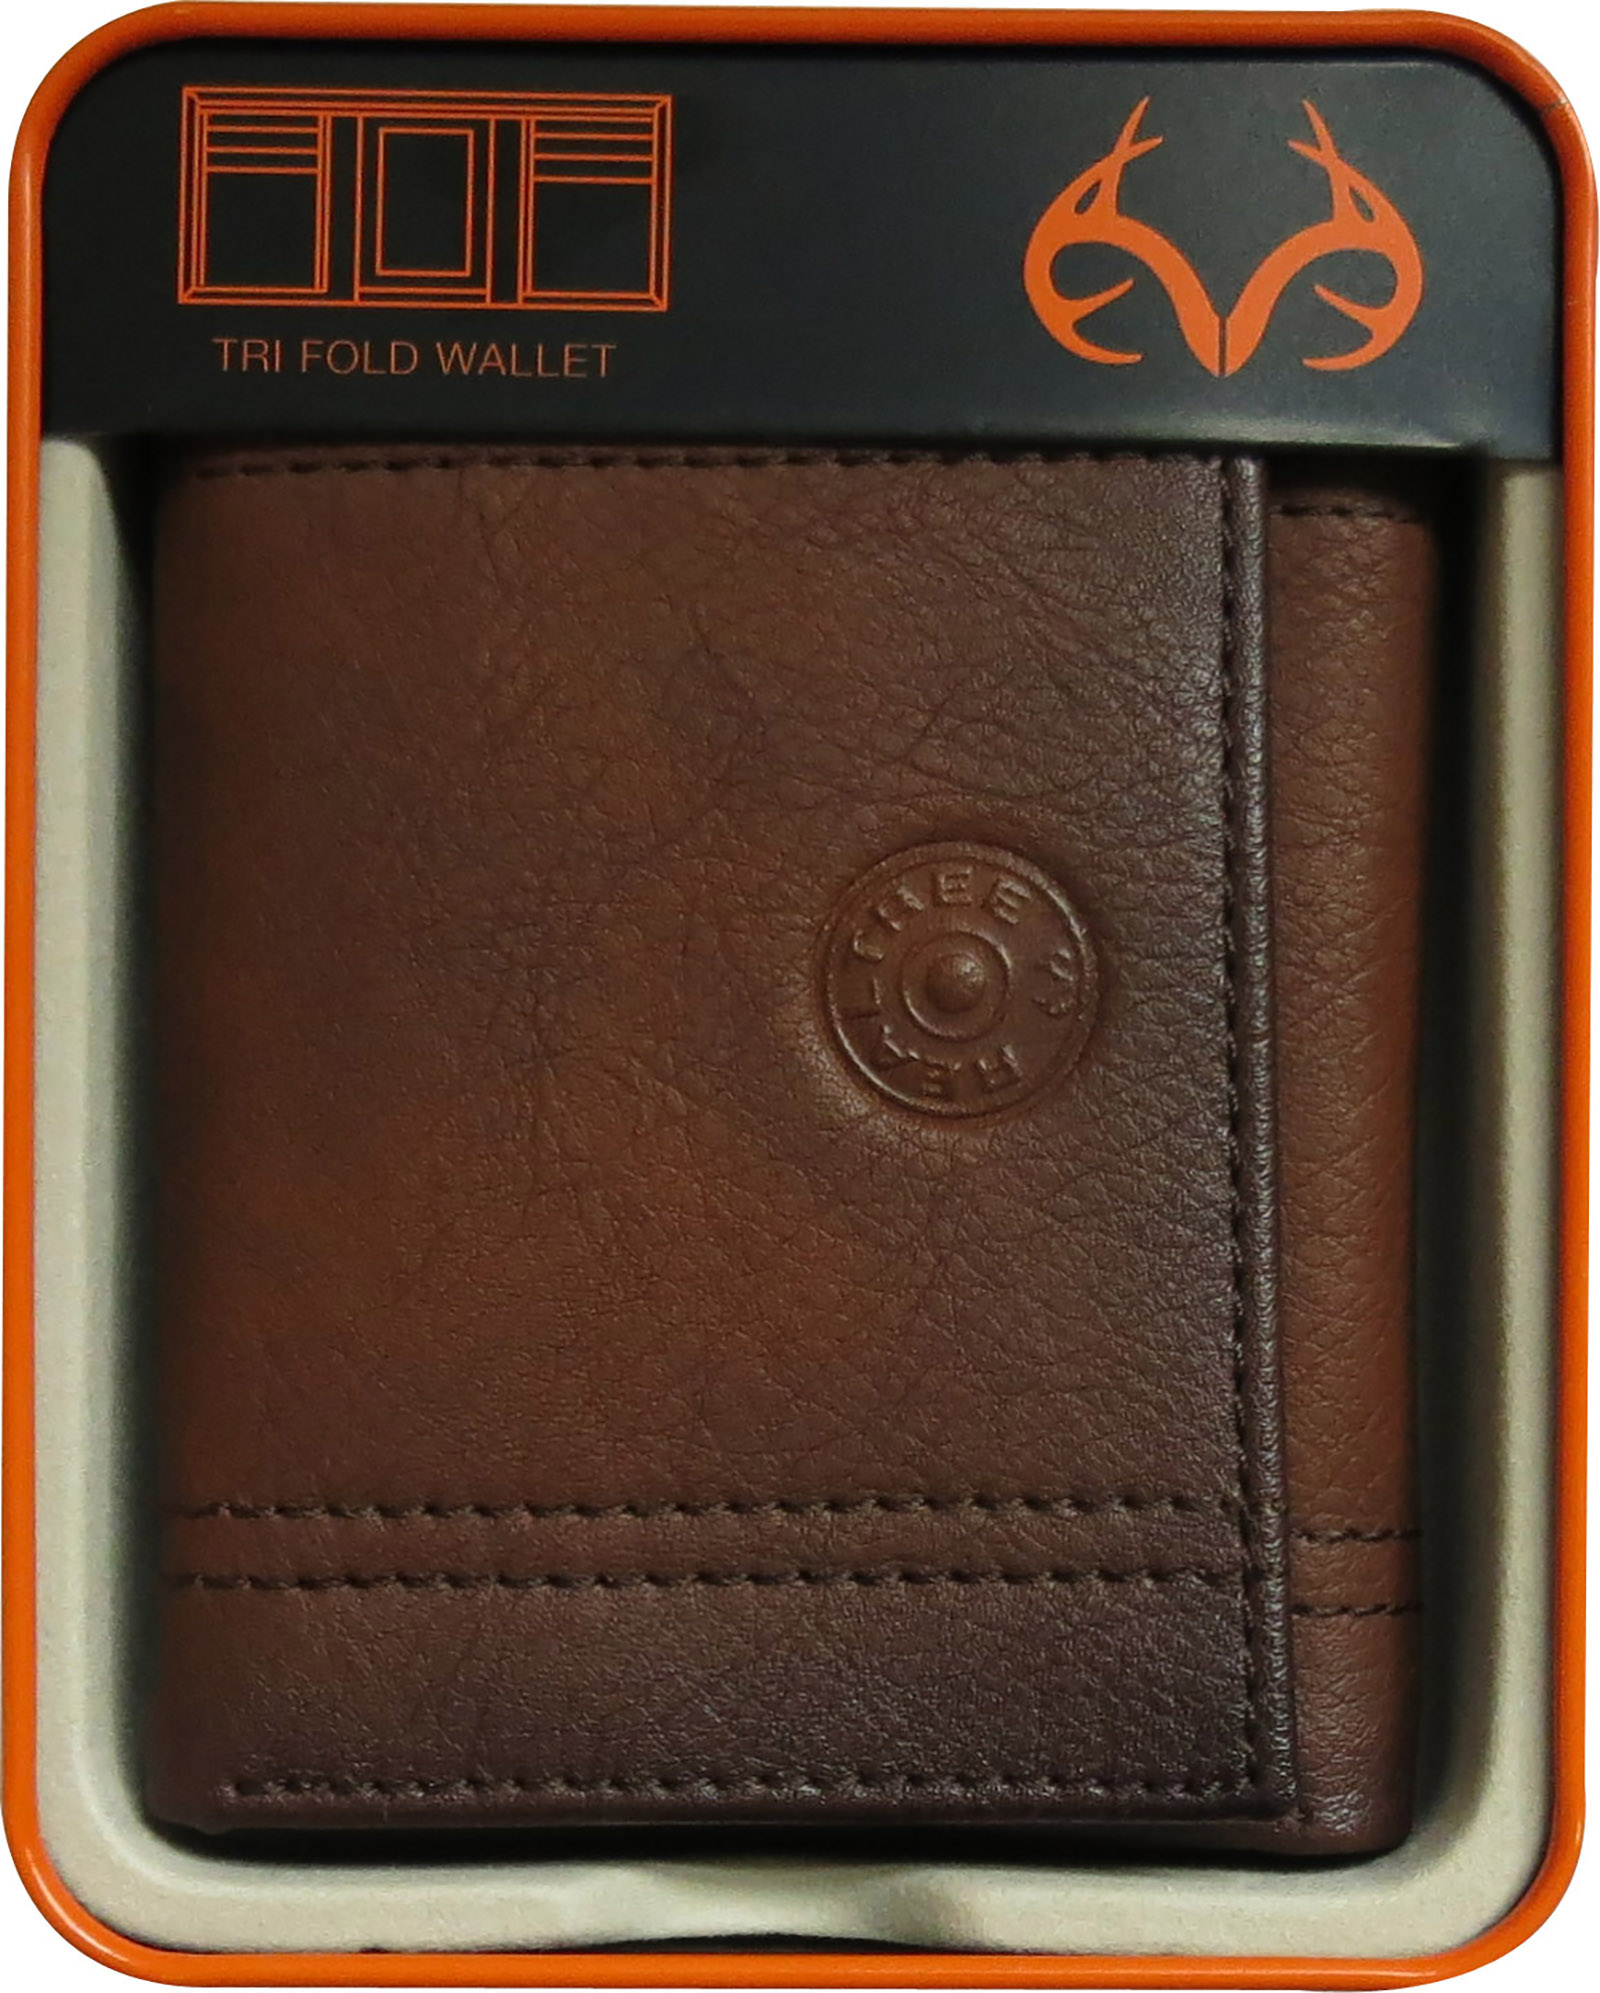 Realtree Tri fold double stitched brown leather wallet with embossed shot shell logo